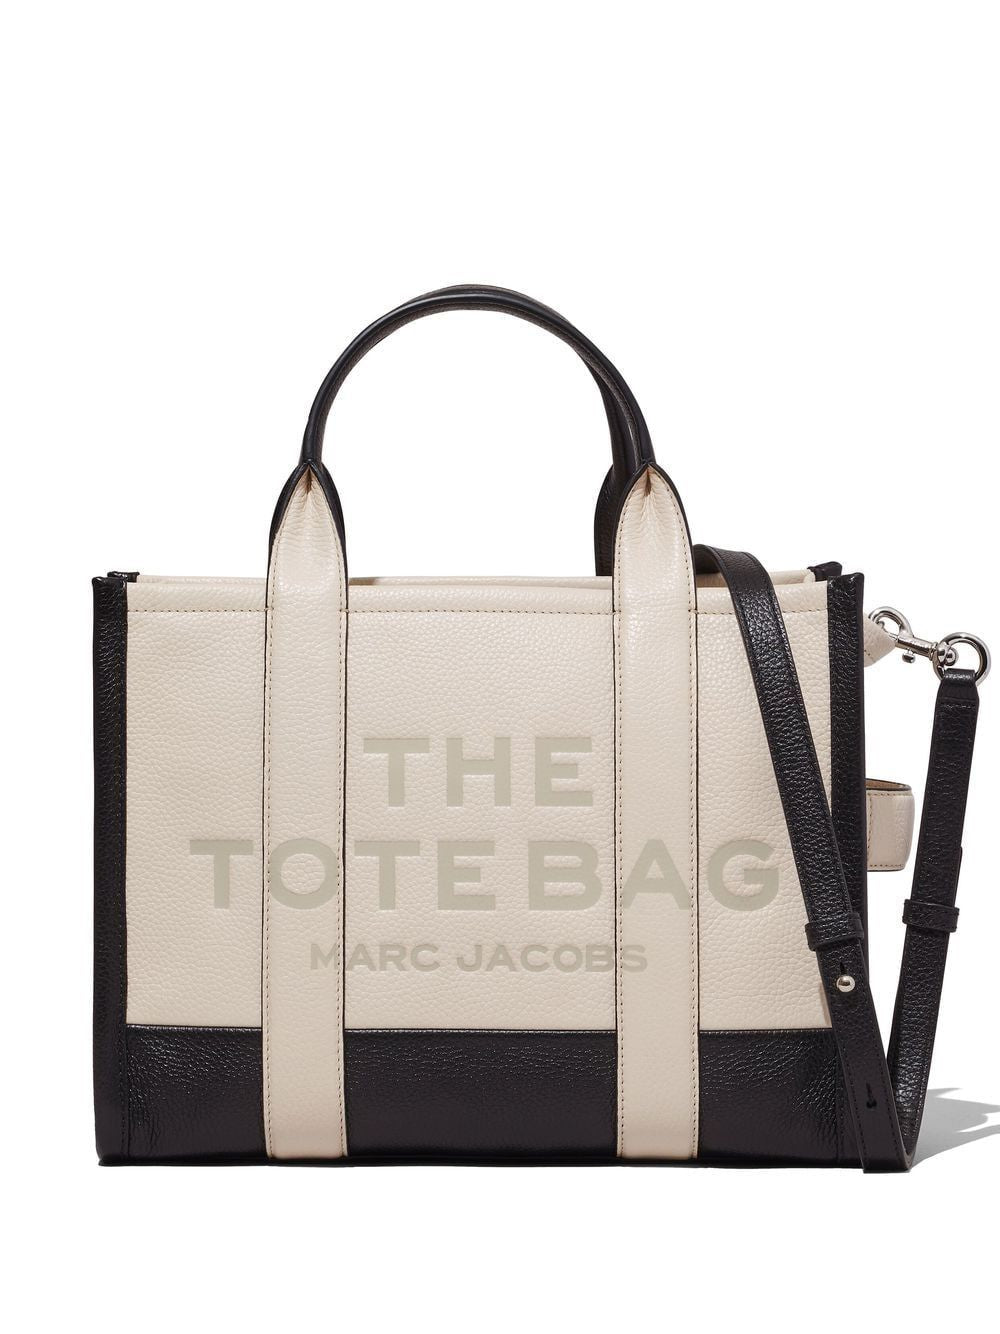 MARC JACOBS Colorblock Medium Leather Tote with Detachable Strap and Silver Accents